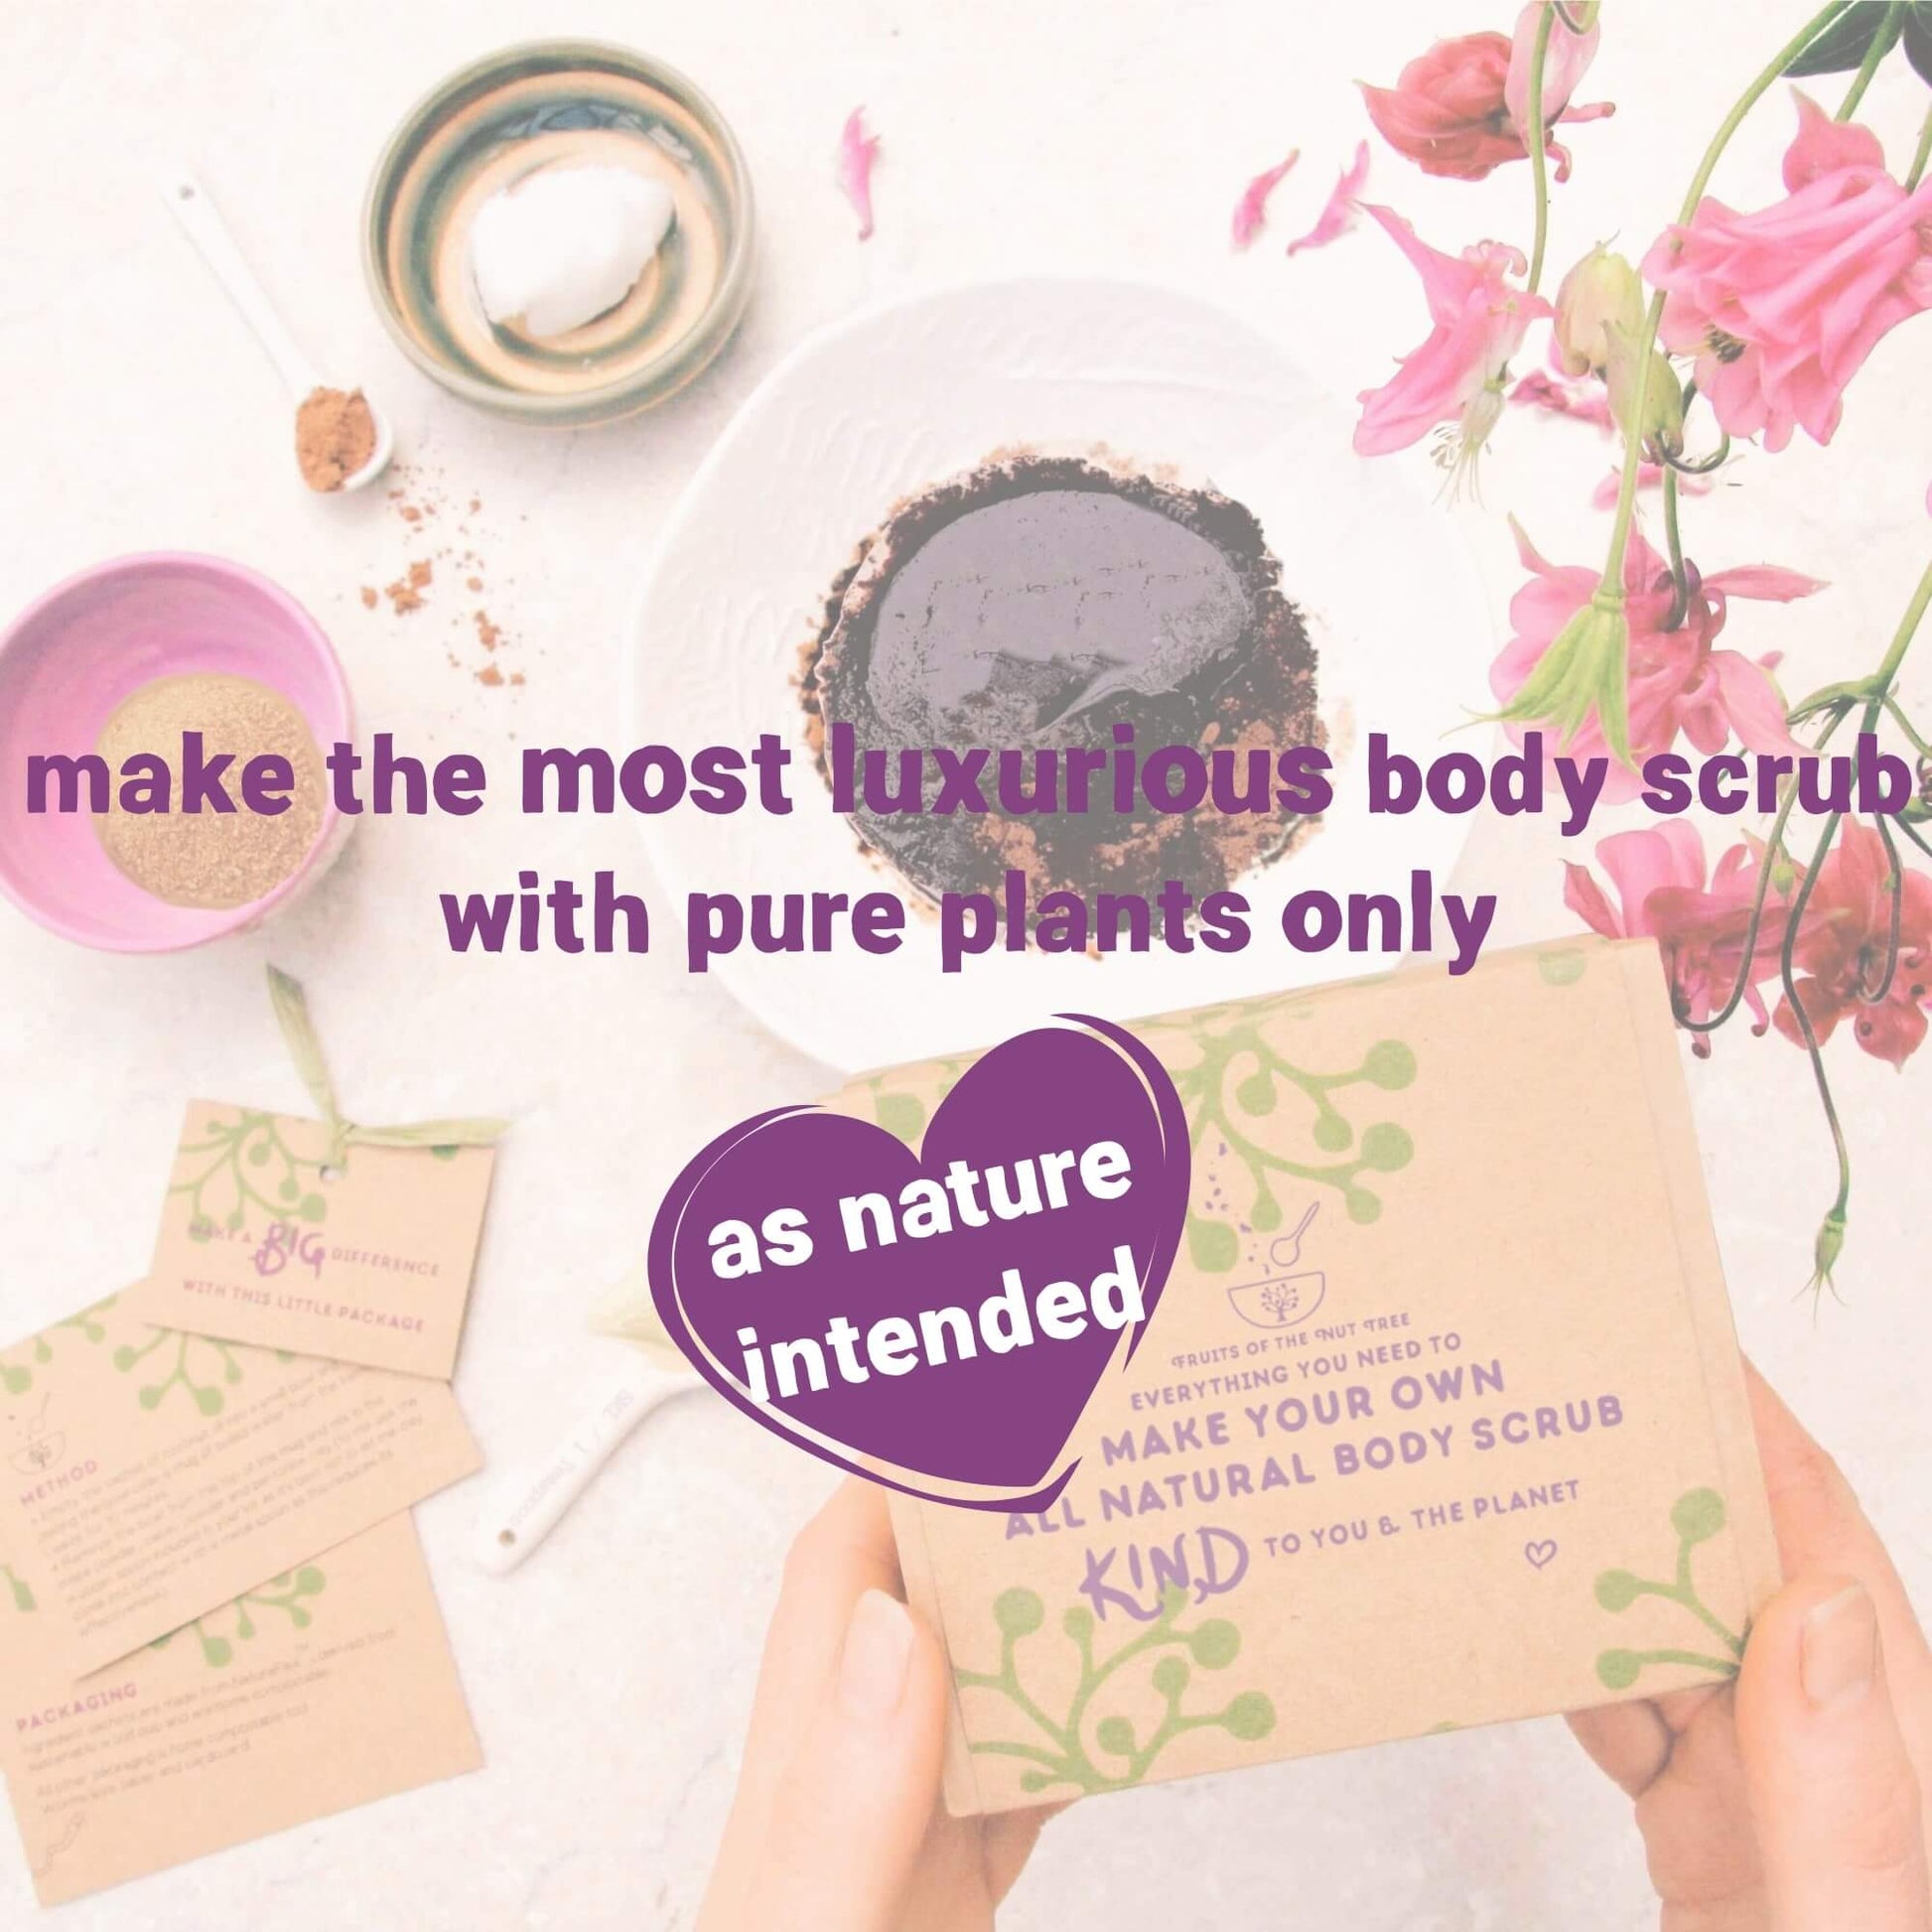 make your own body scrub with only natural, organic ingredients